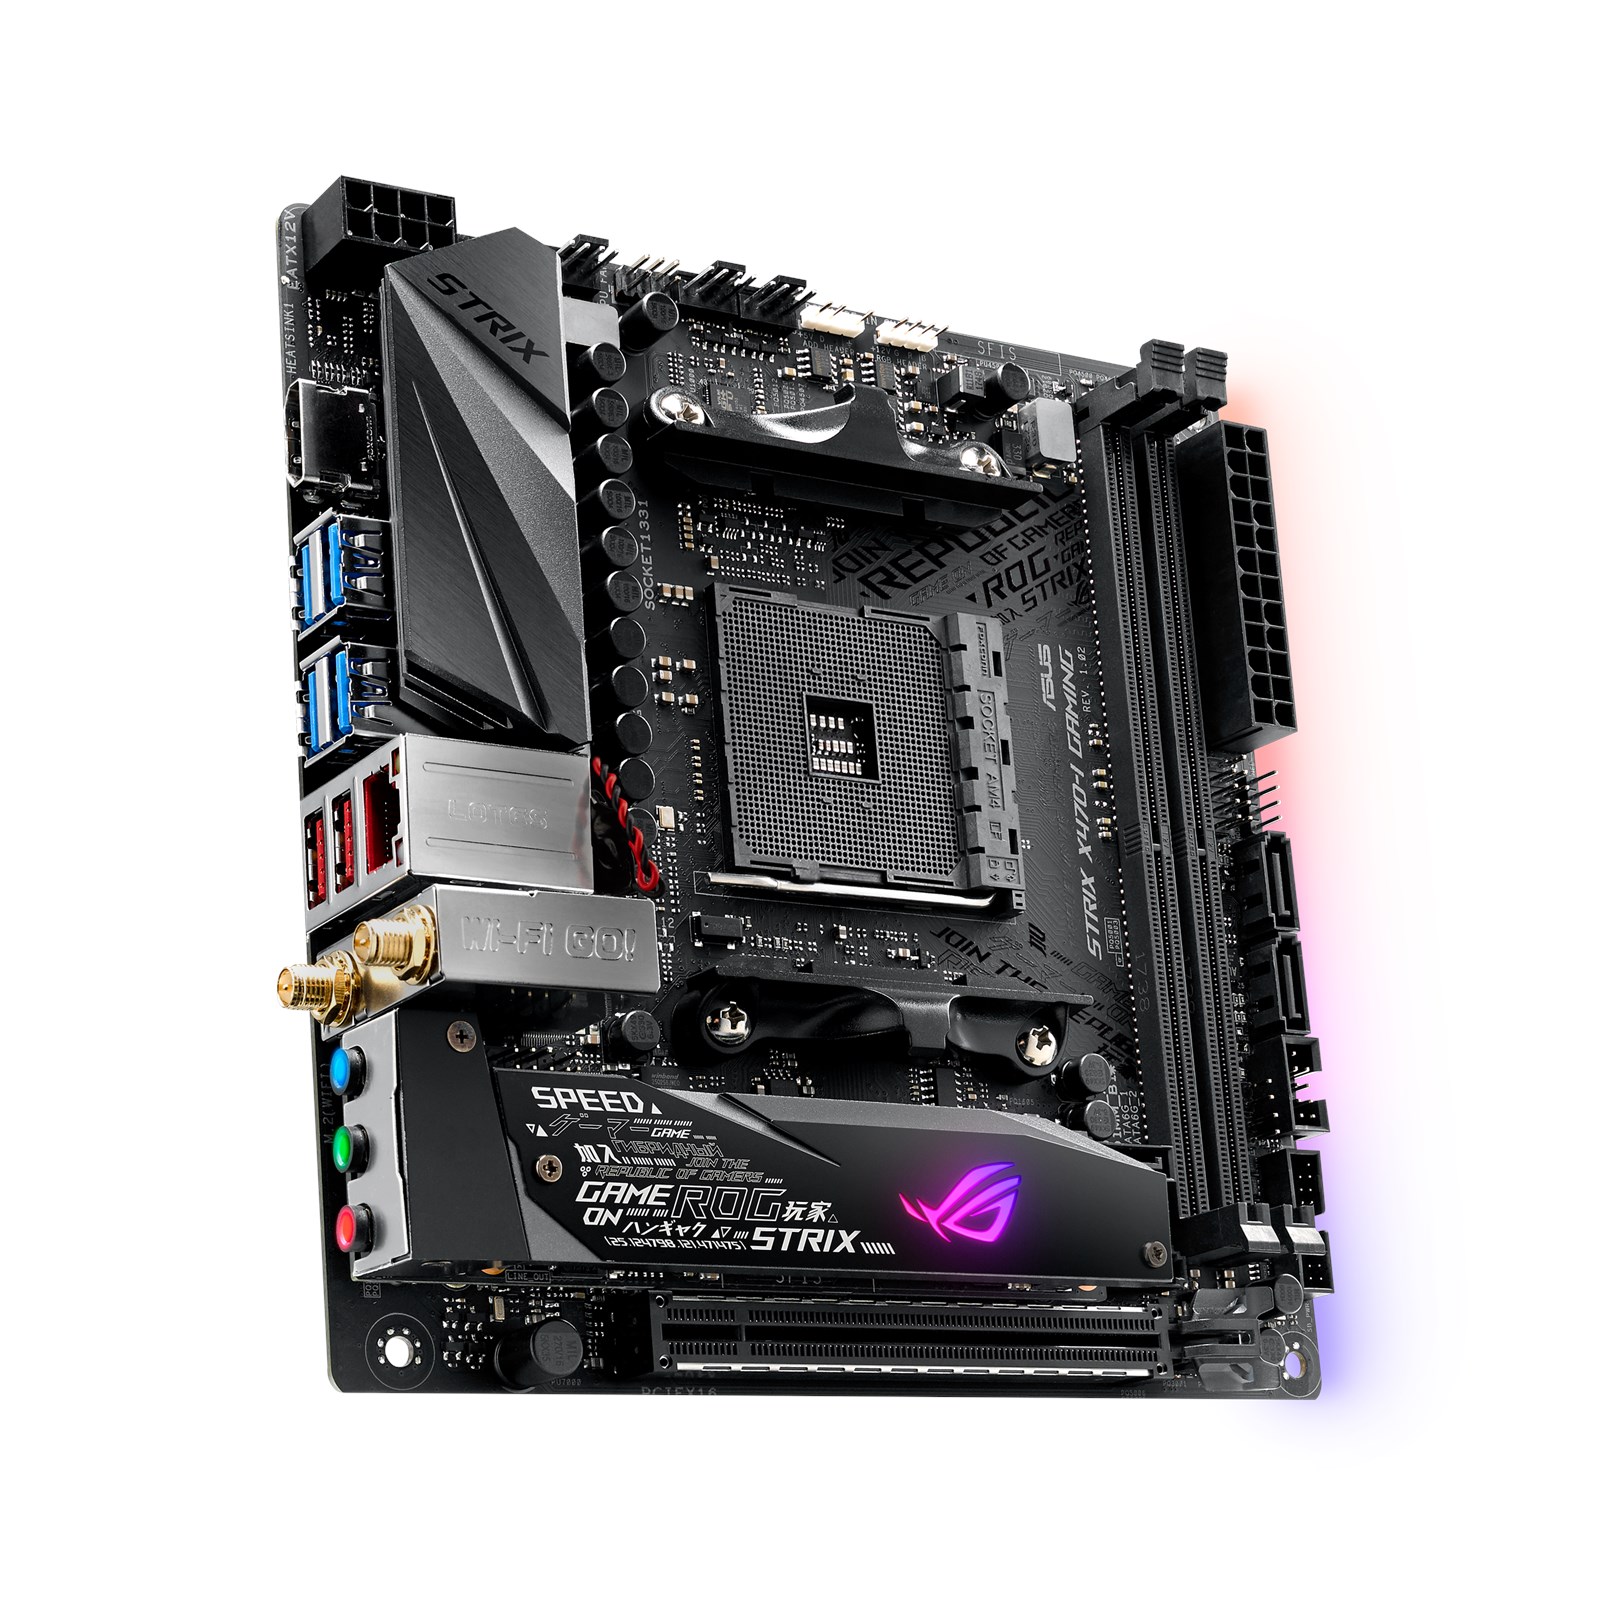 Asus Rog Strix X470 I Gaming Amd Motherboard 90mb0xe0 M0eay0 Ccl